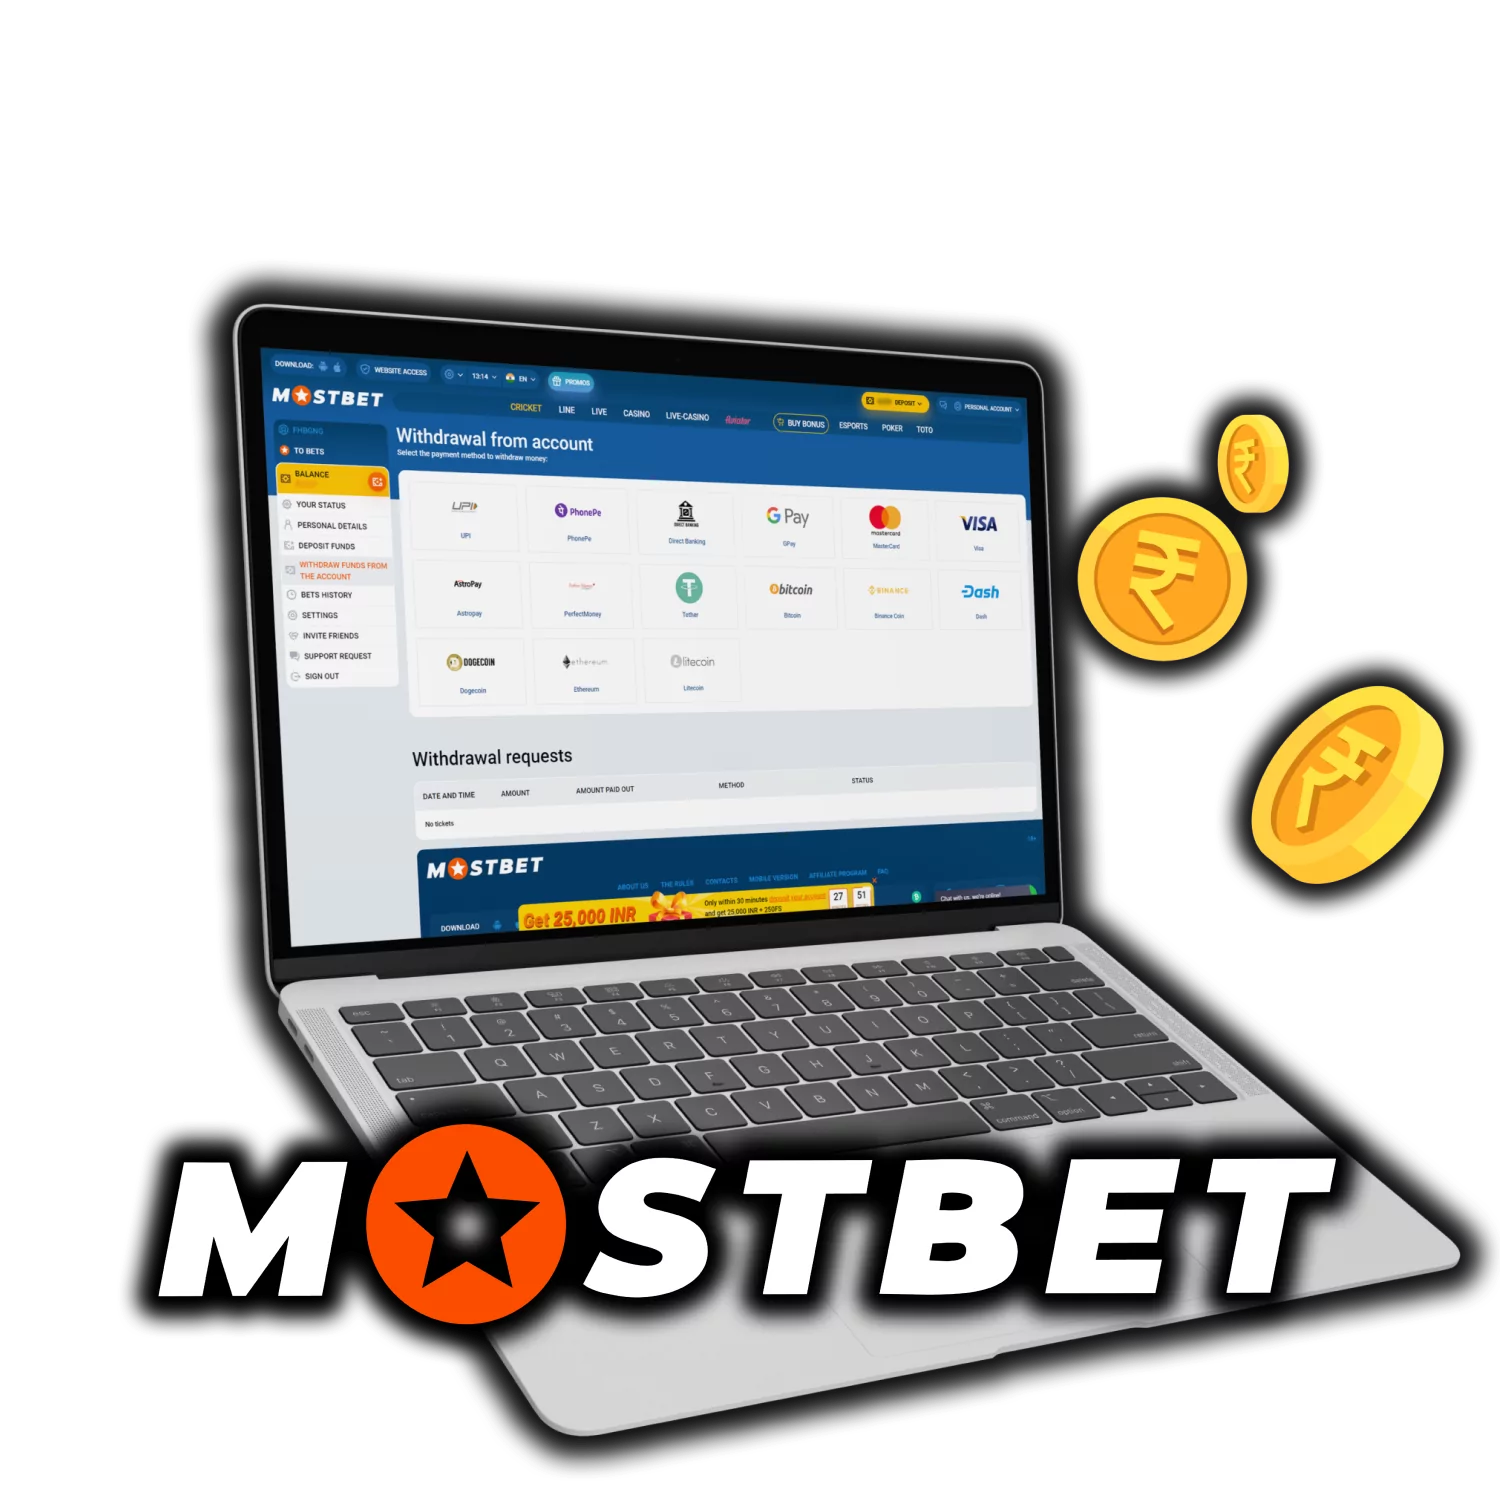 Find out how easy it is to deposit and withdraw your winnings at Mostbet.